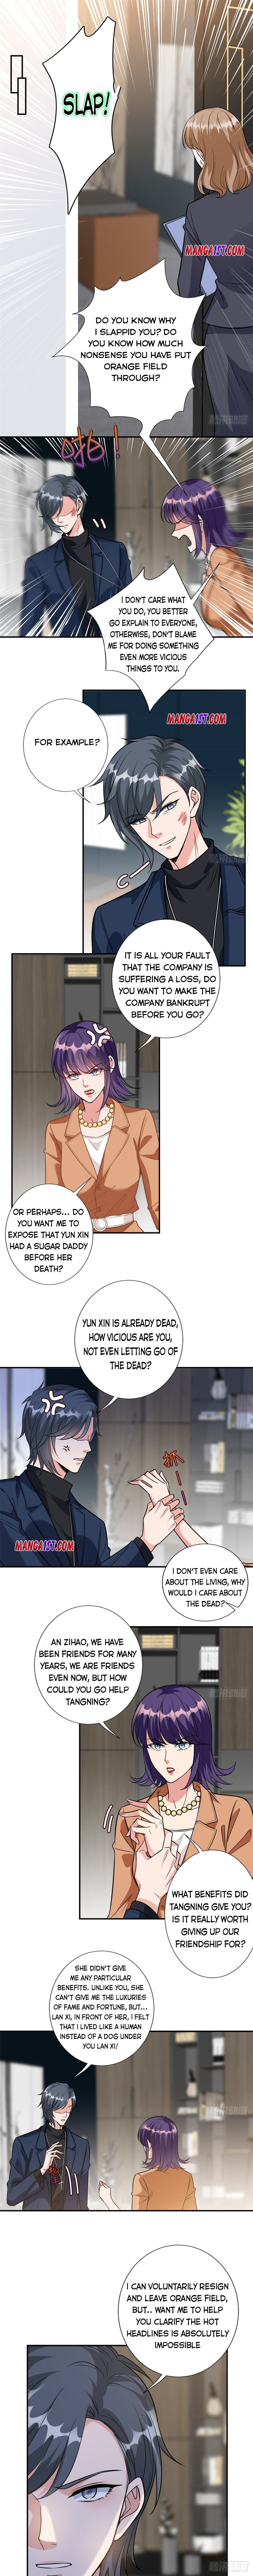 Trial Marriage Husband: Need To Work Hard - Page 4